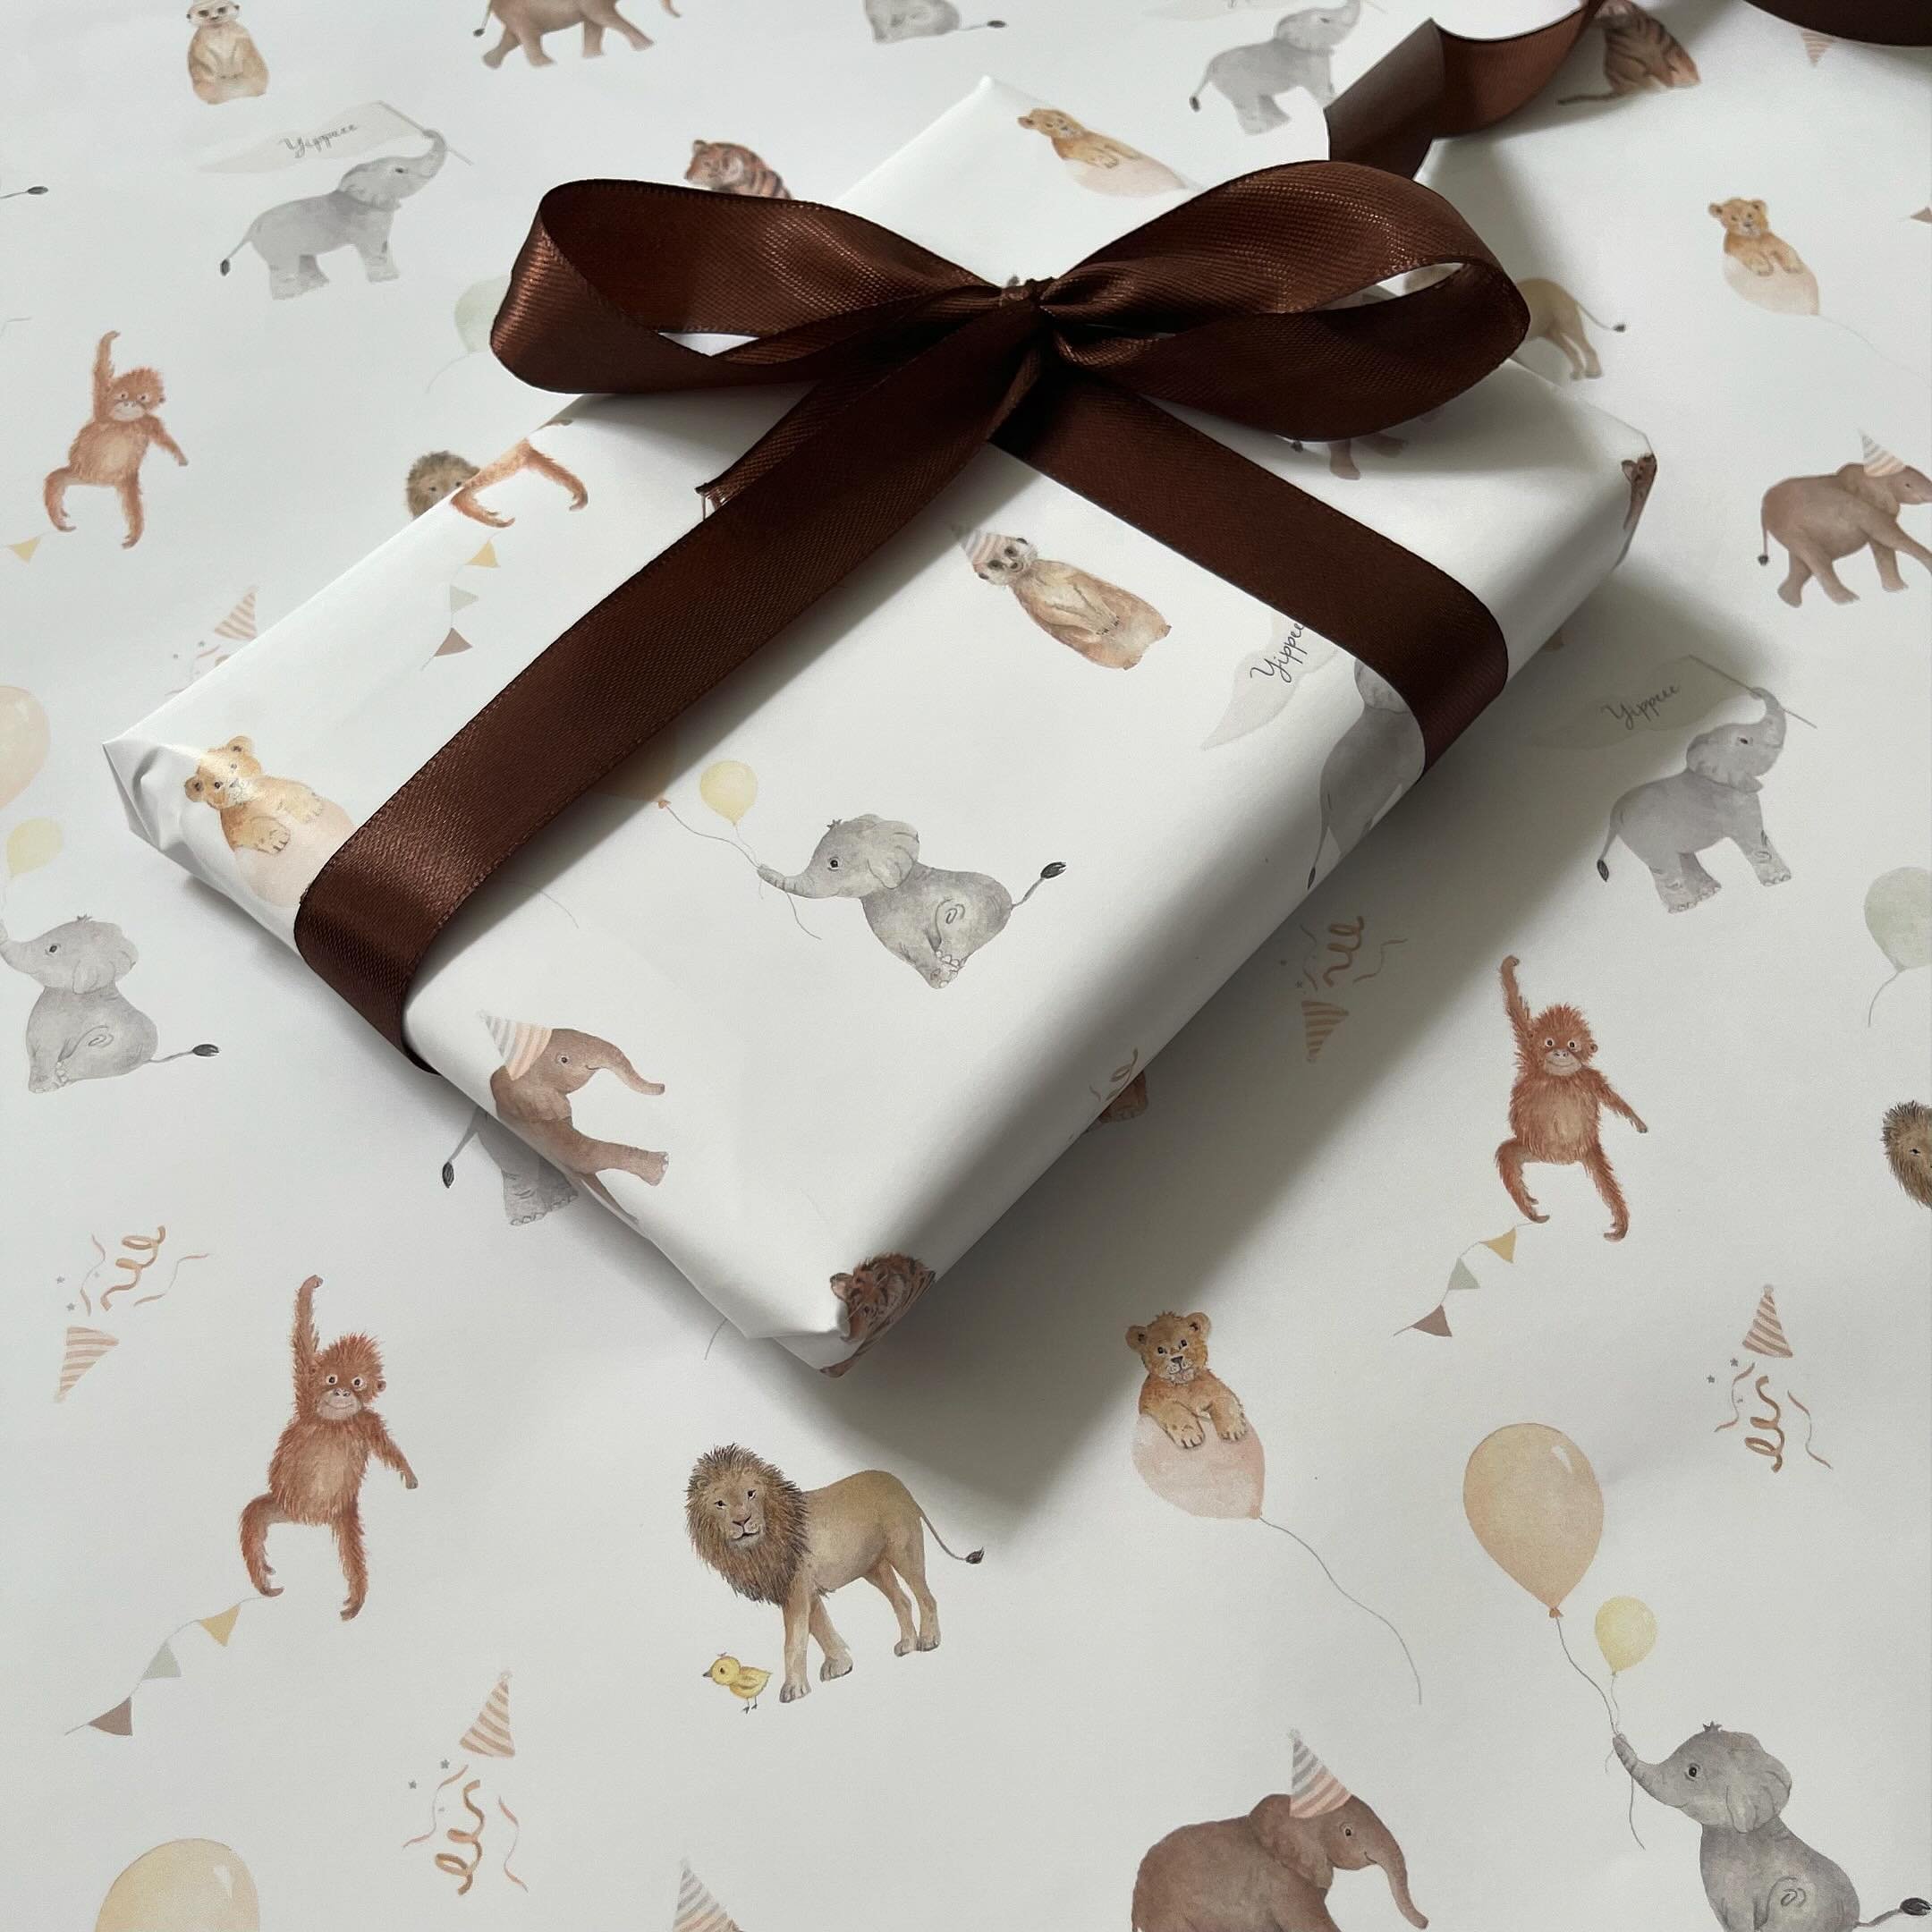 Today has consisted of emptying Homebase&rsquo;s shelves of tester paint pots as apparently I keep changing my mind on wall colour for @pglivelondon 🙊

However one thing I know for certain is that I love this new kids gift wrap.. and so did you! Tha